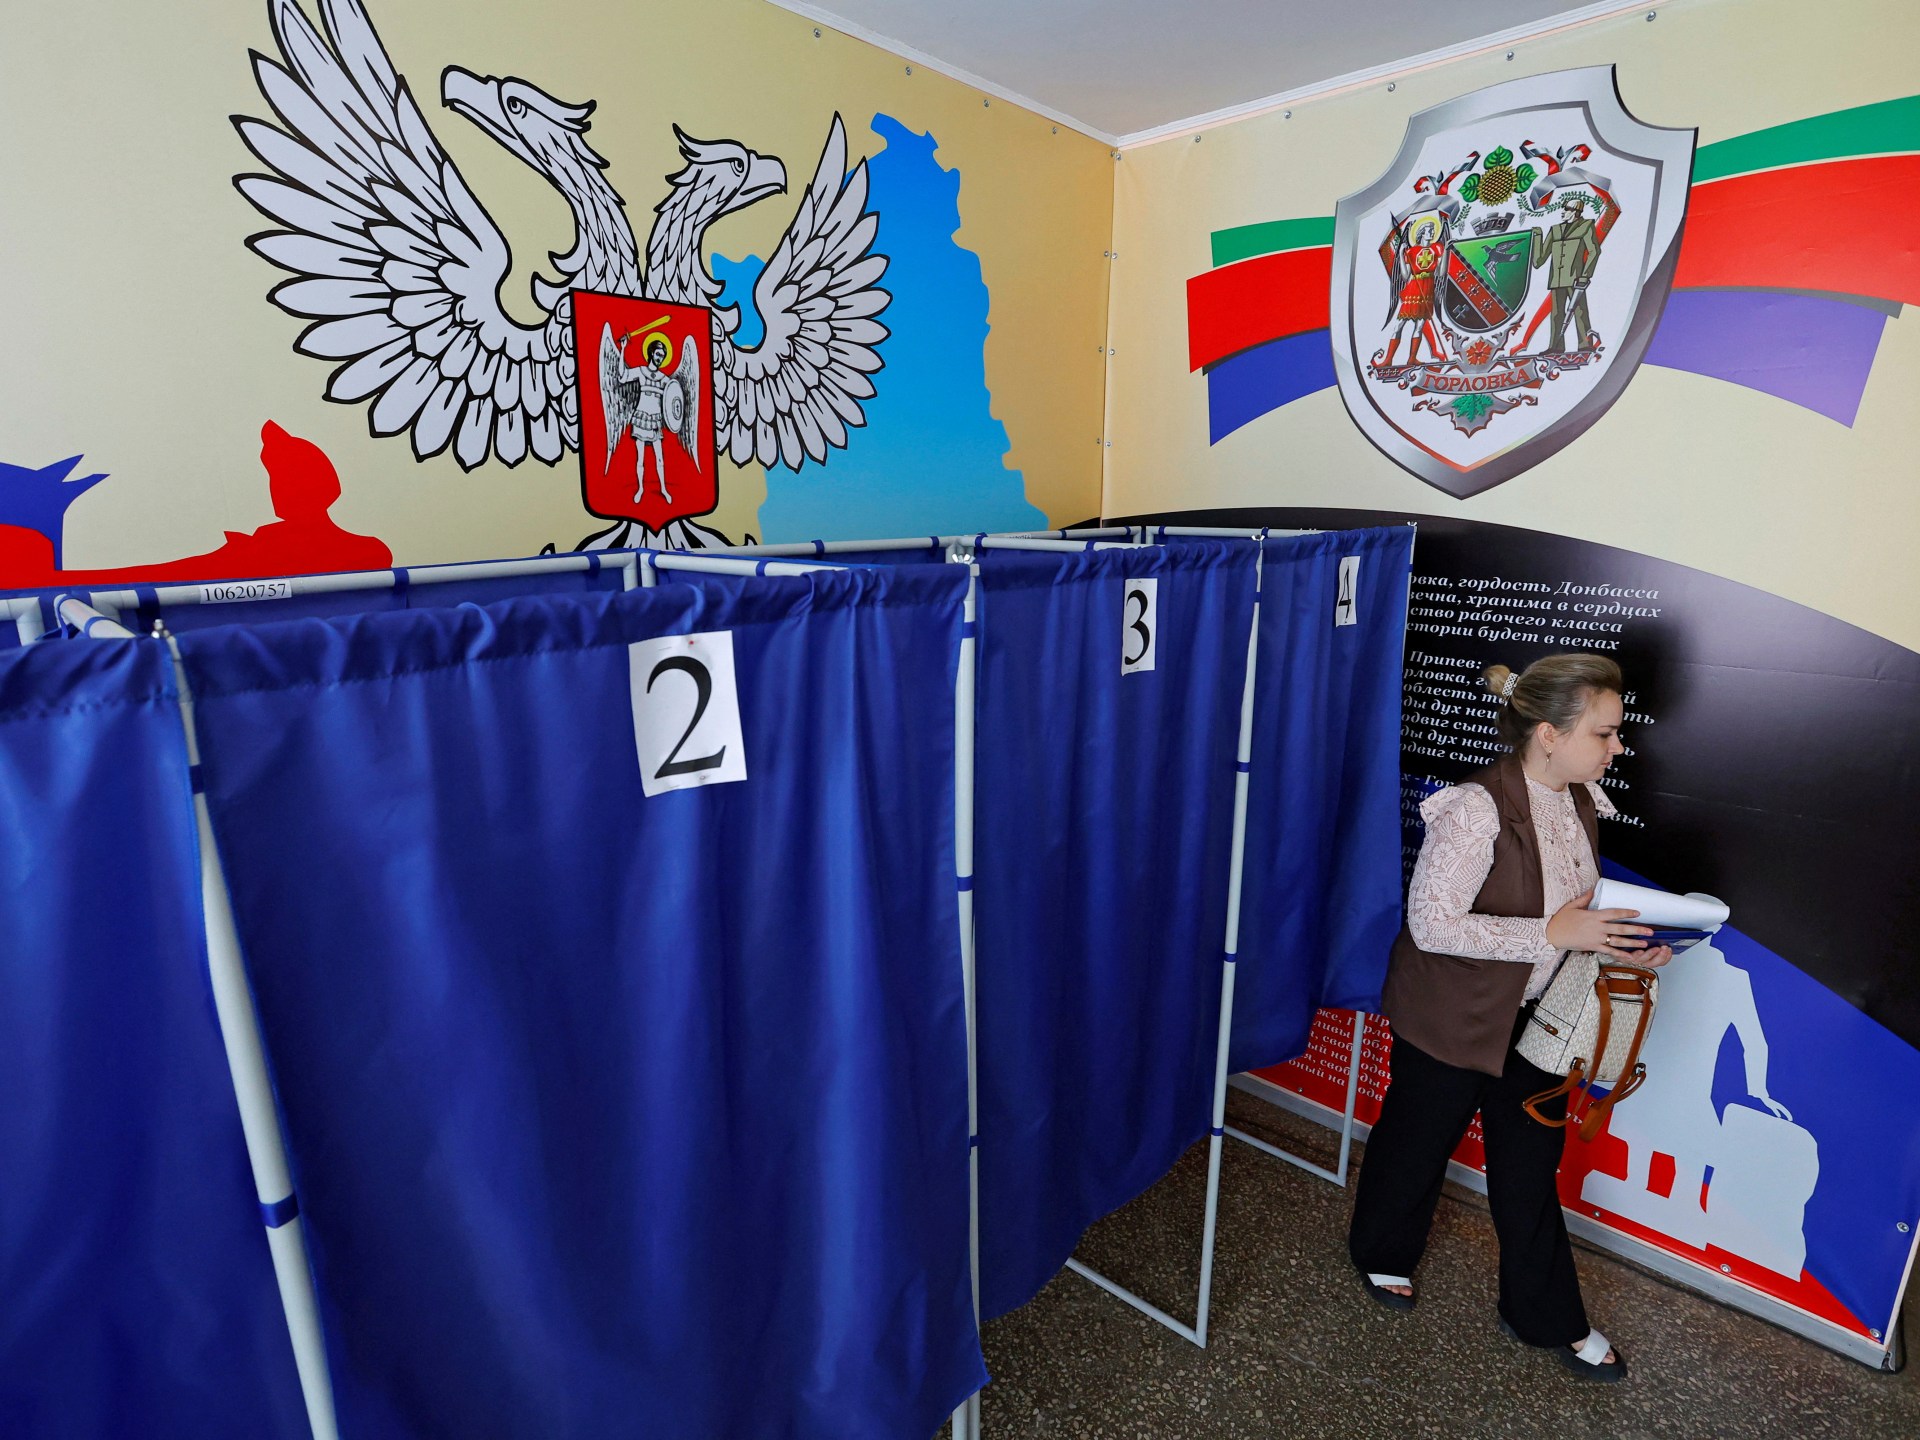 Russia plans presidential vote in annexed Ukrainian regions | News #Russia #plans #presidential #vote #annexed #Ukrainian #regions #News